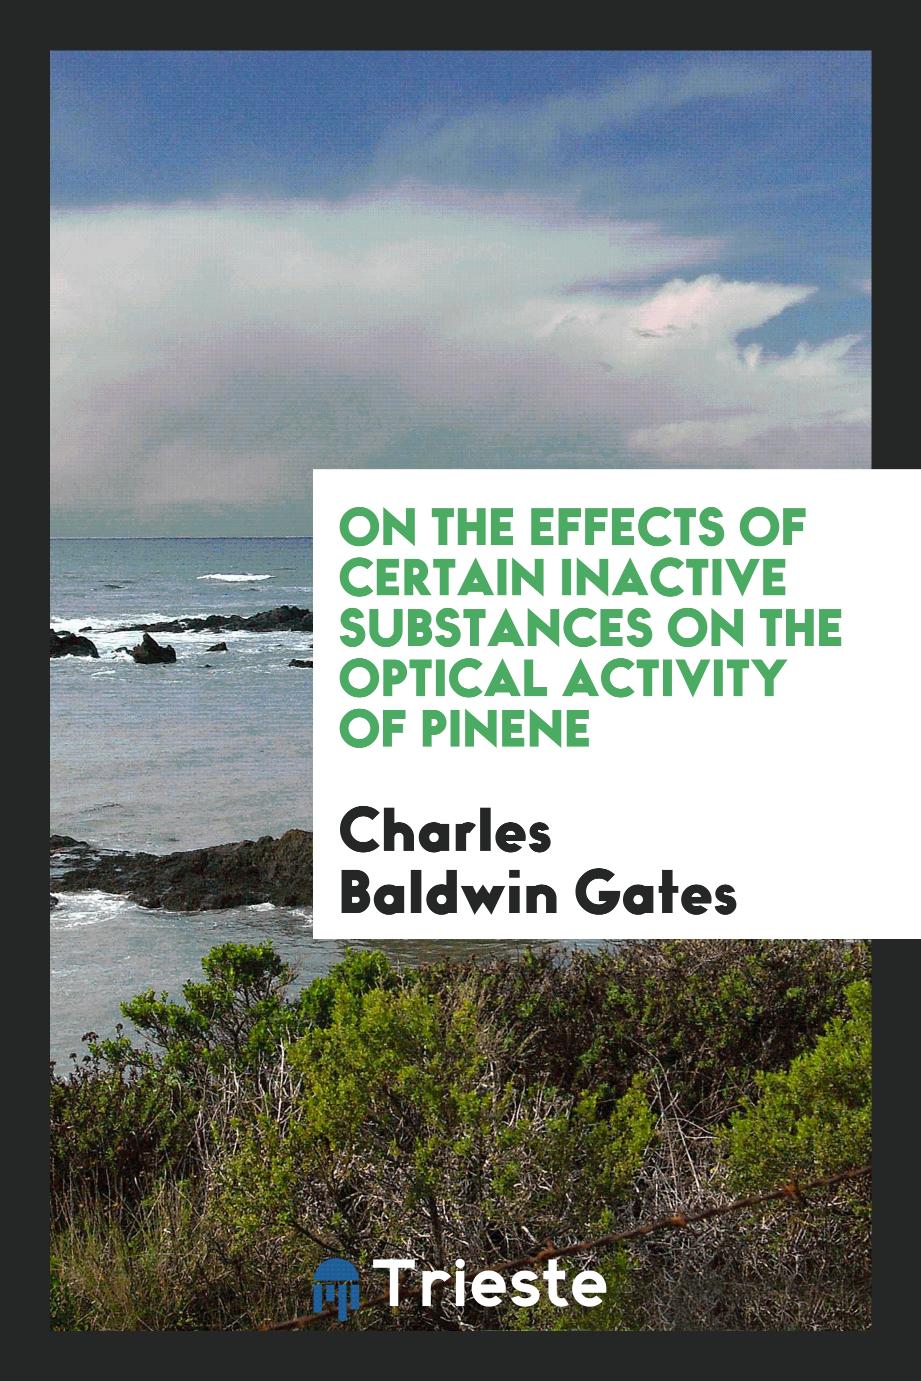 On the Effects of Certain Inactive Substances on the Optical Activity of Pinene